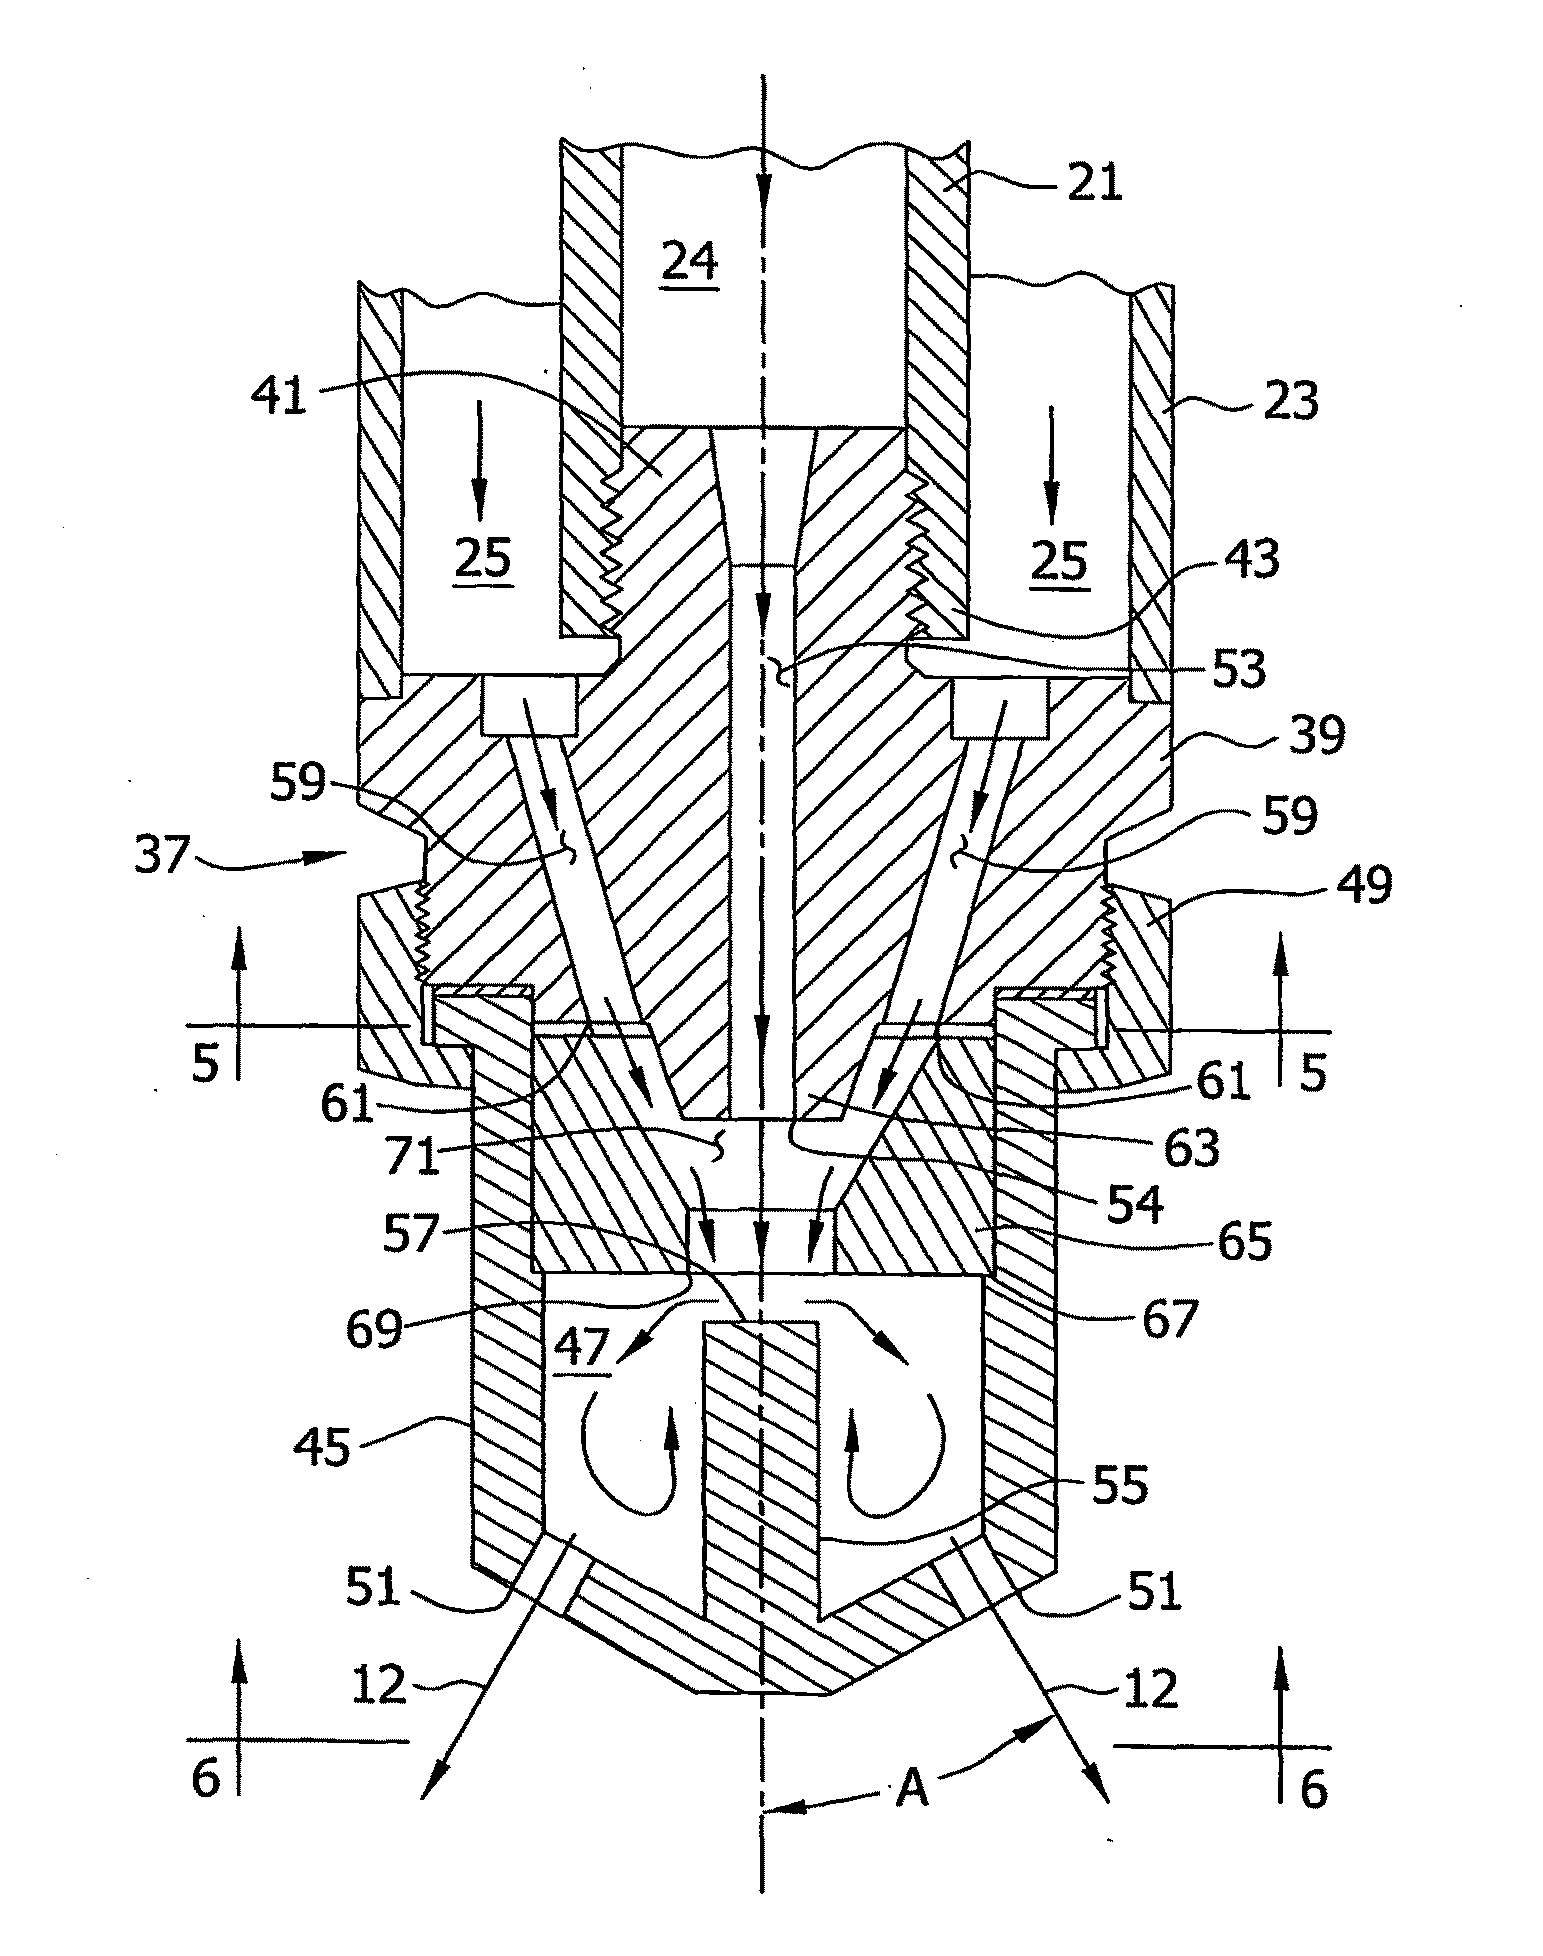 Process and Apparatus for the Combustion of a Sulfur-Containing Liquid